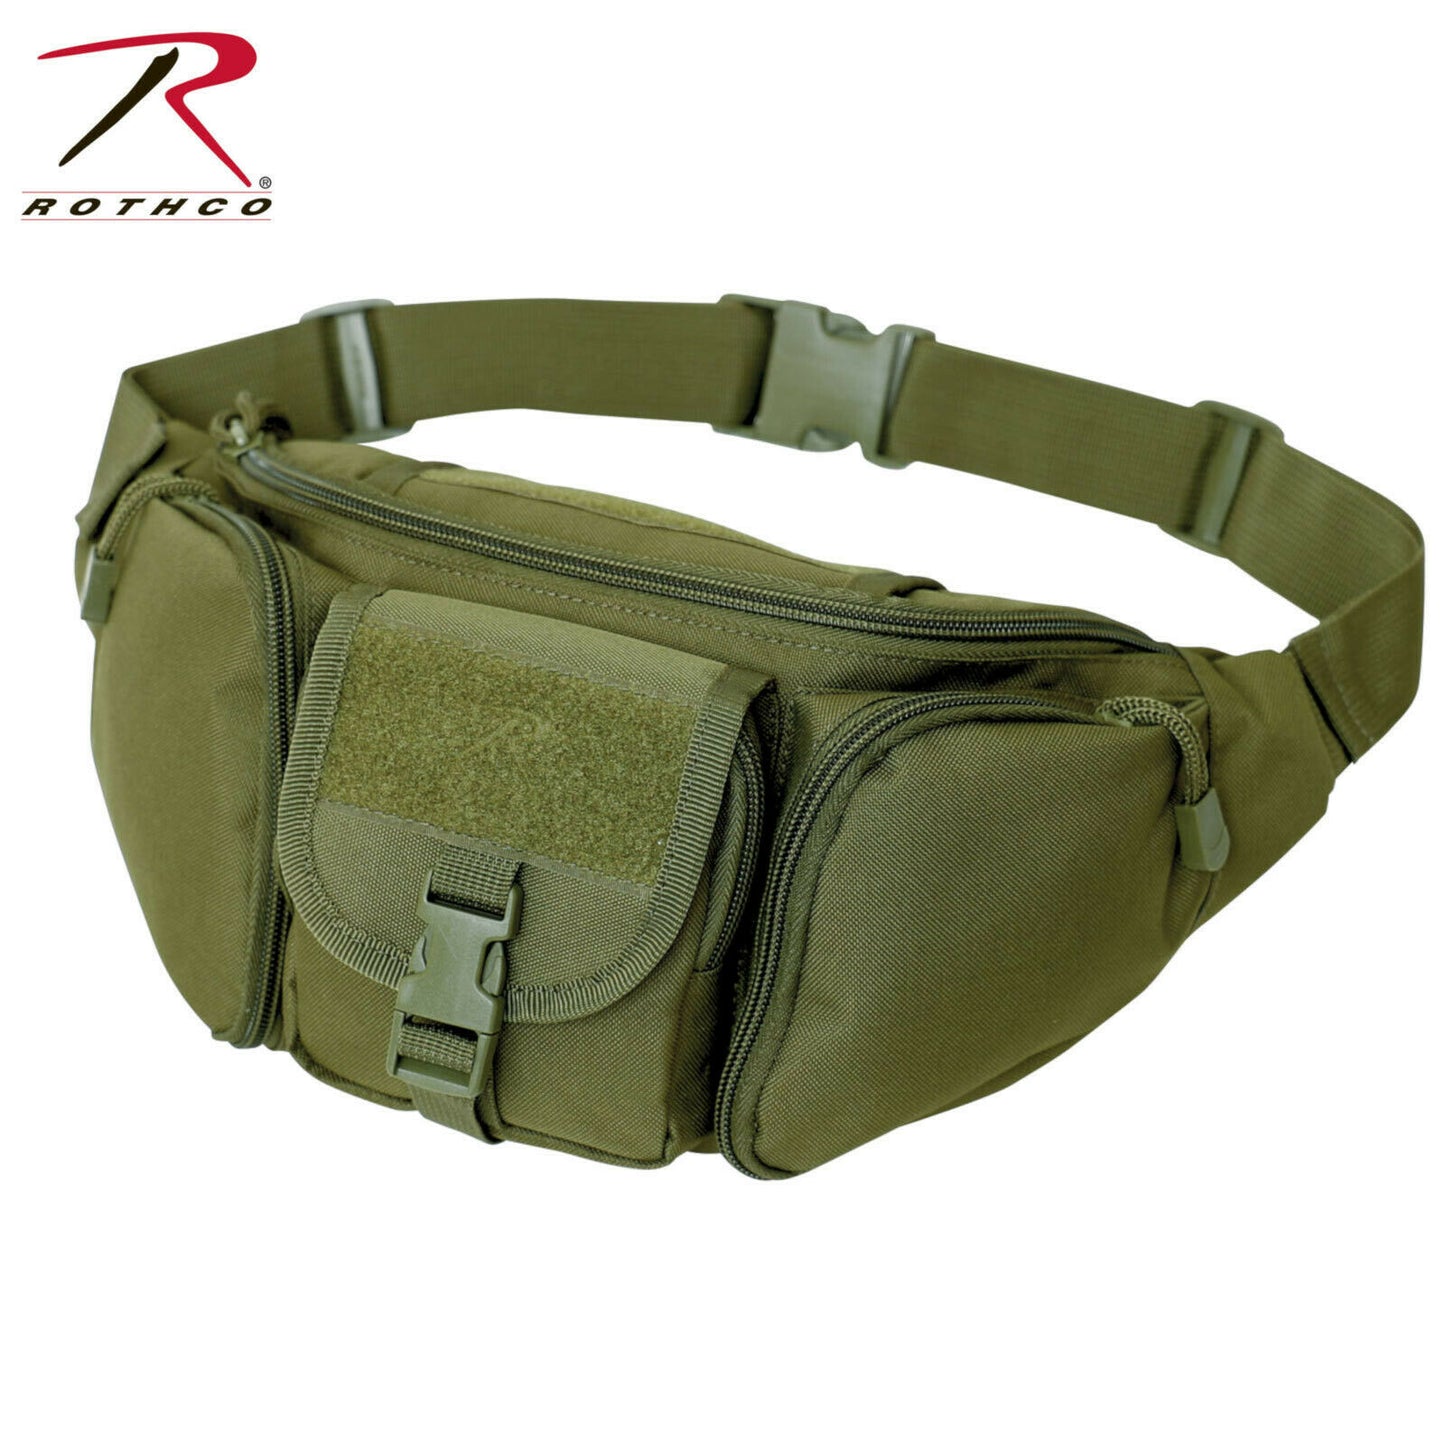 Rothco's Concealed Carry Waist Pack - Olive Drab Tactical Fanny Pack